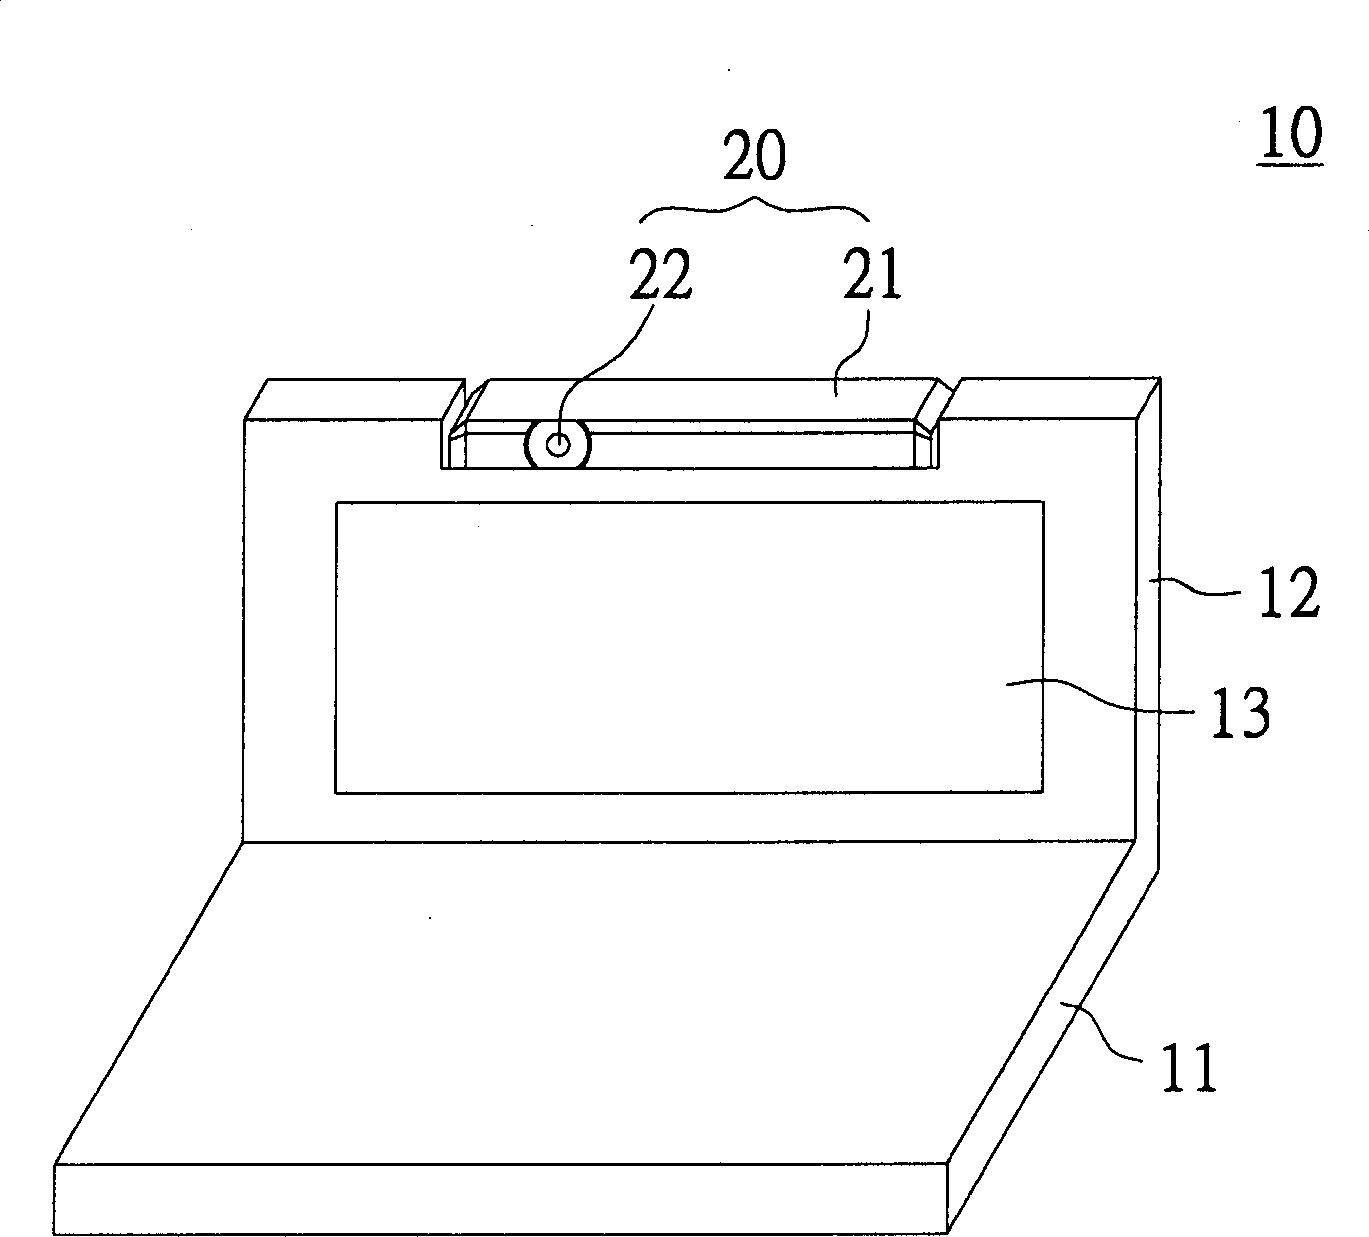 Display with rotatable image pick-up assembly